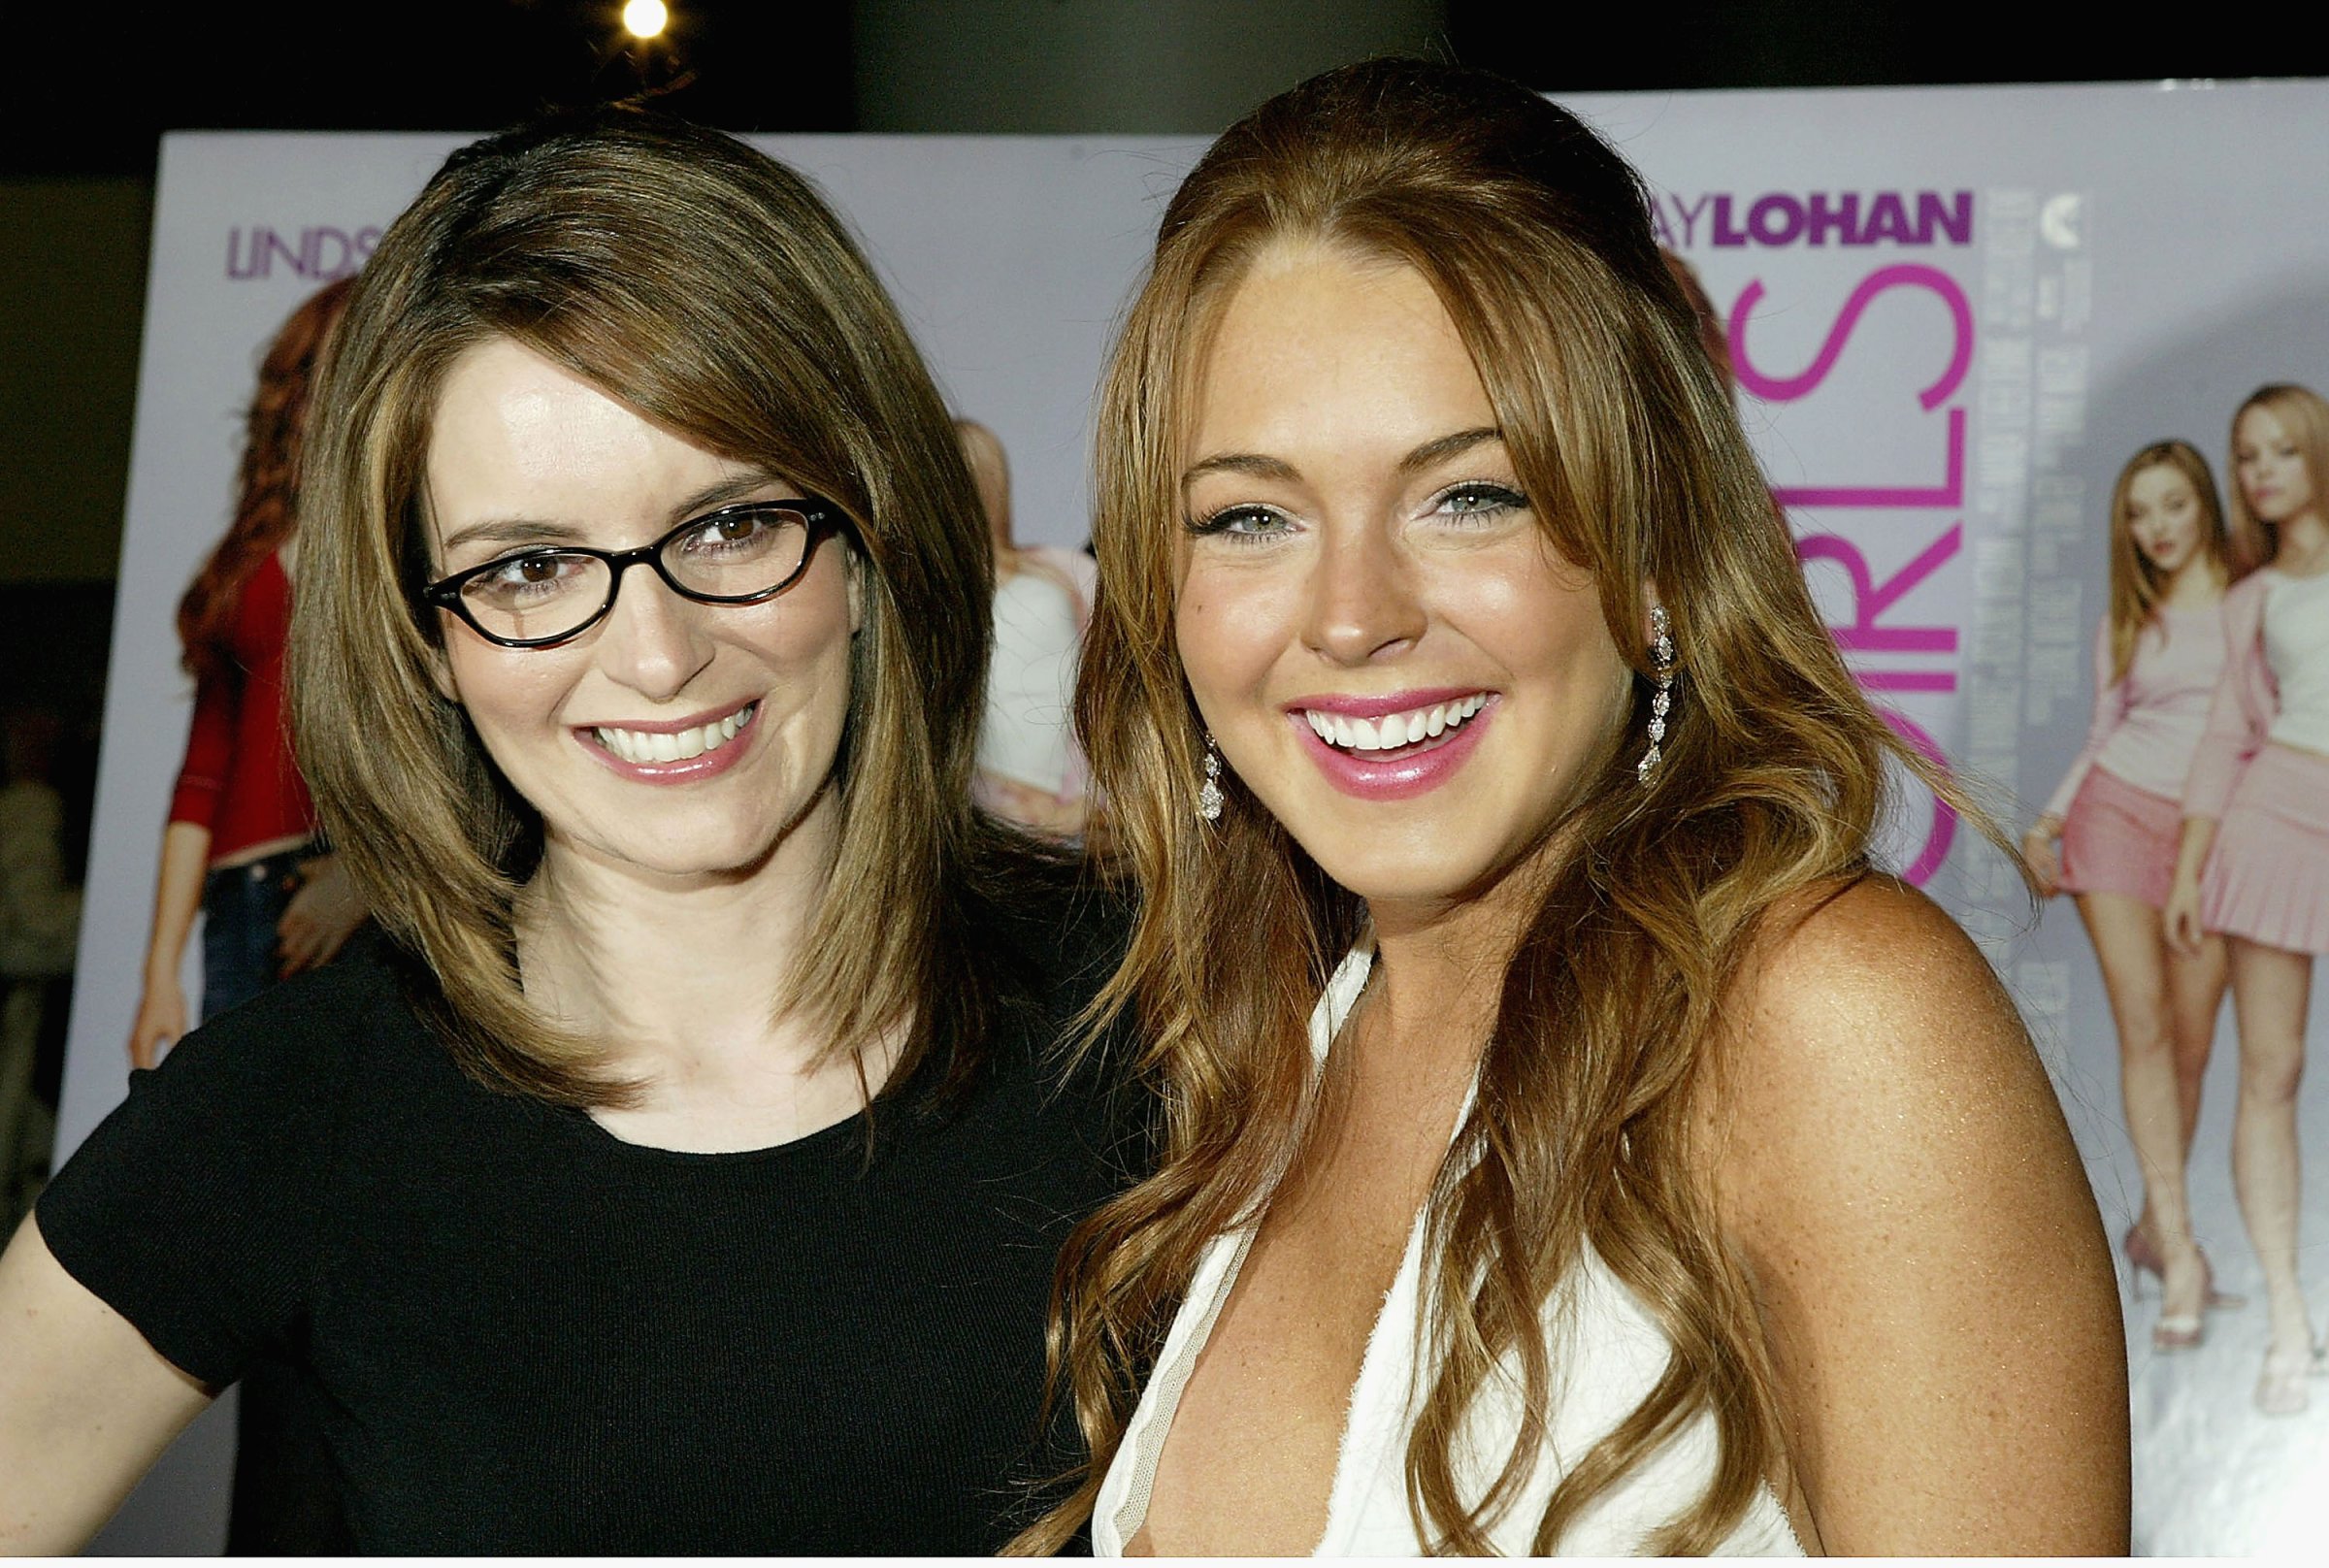 Comedian/writer Tina Fey and actress Lindsay Lohan attend a private screening of "Mean Girls" on April 23, 2004 at Loews Lincoln Square Theater, in New York City.